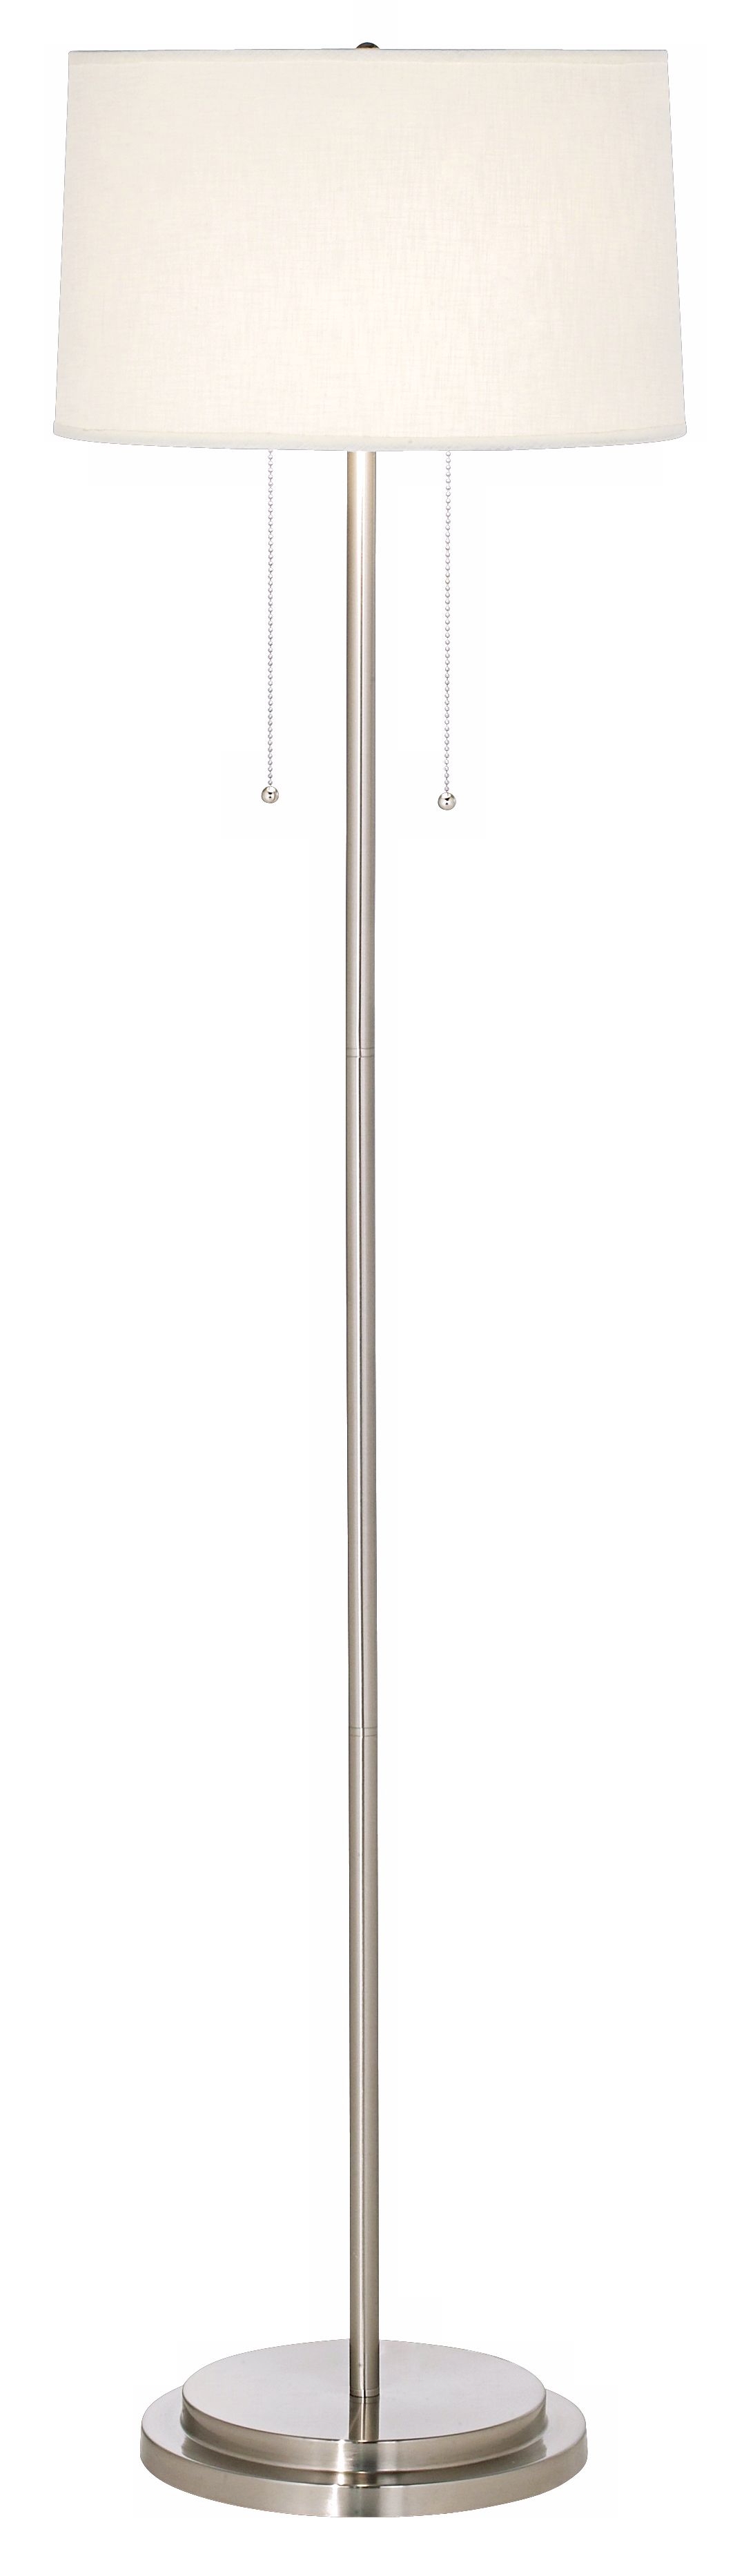 Simplicity Double Pull Floor Lamp - Image 0